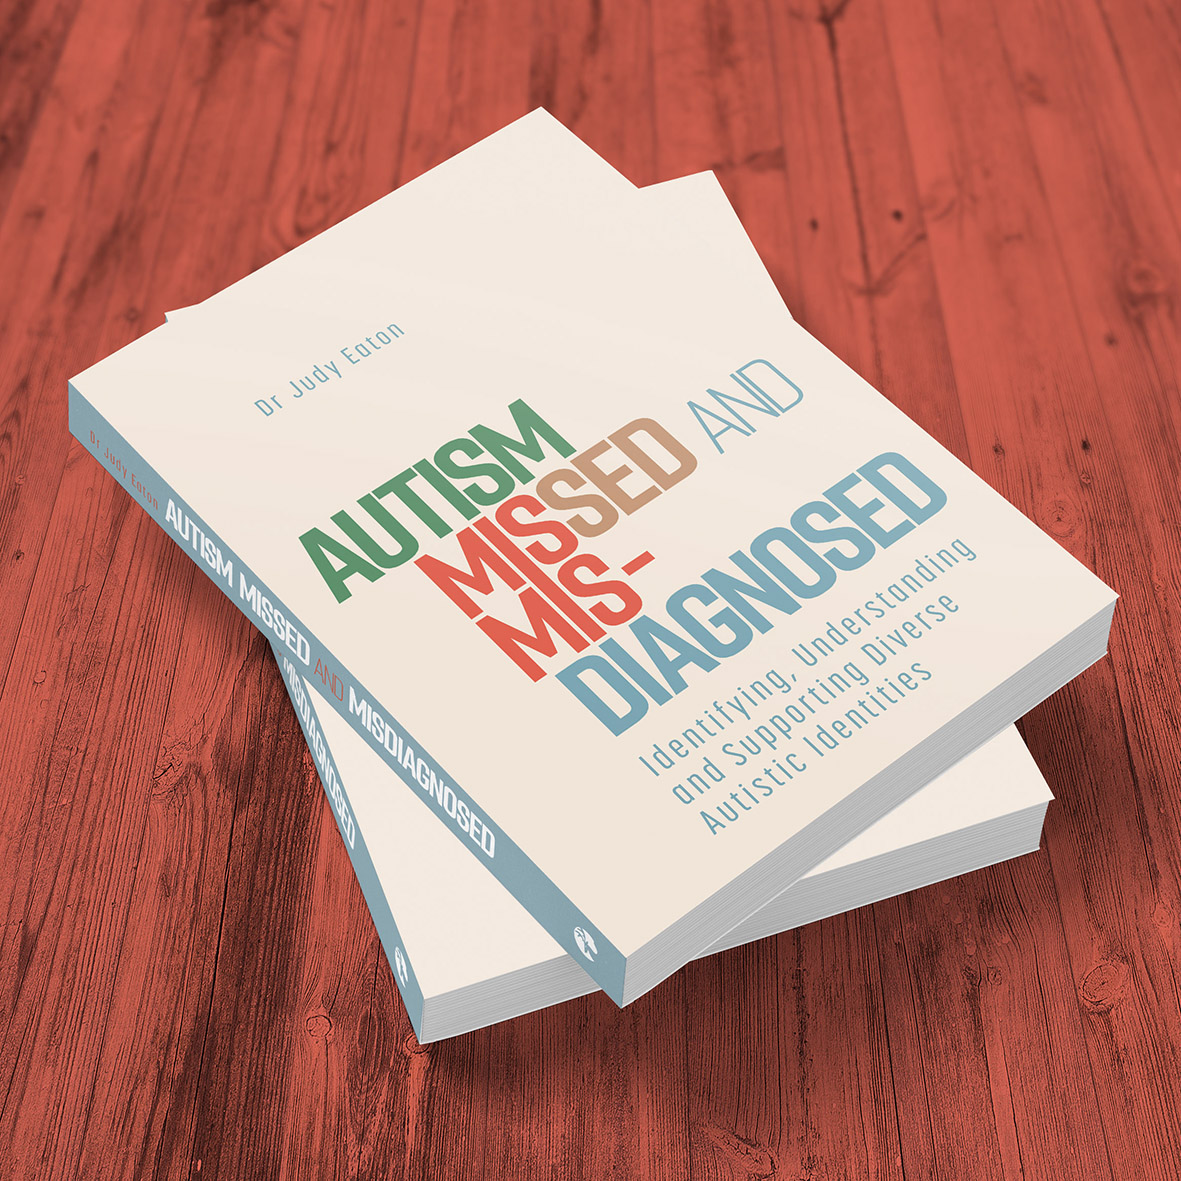 A #3DRender of my recently approved #book cover #design for #Autism Missed and Misdiagnosed by Dr Judy Eaton (@DrJudes03). Available November 2023 from @JKPBooks / @JKPAutism